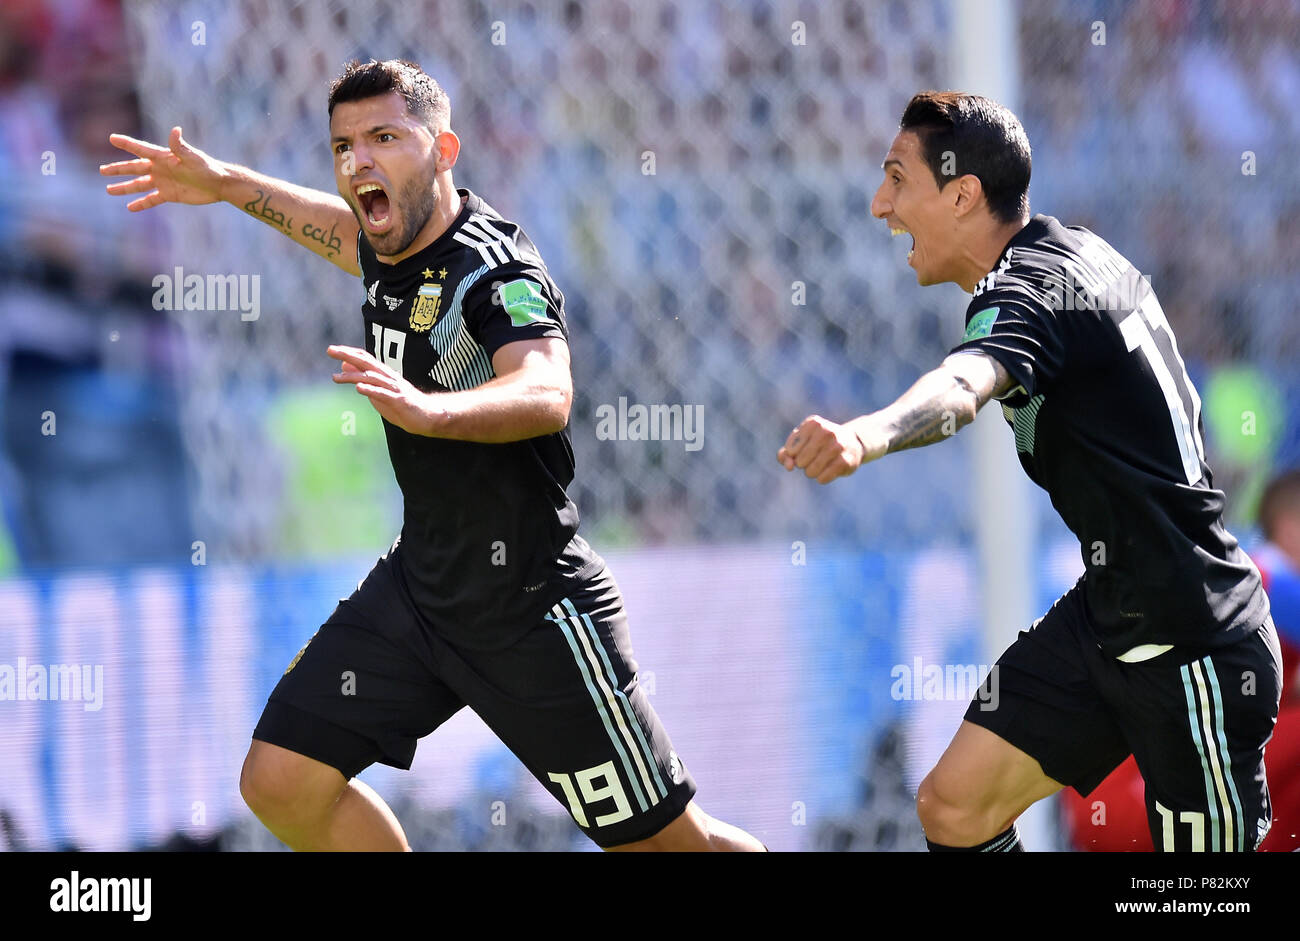 MOSCOW, RUSSIA - JUNE 16: Sergio Aguero of Argentina celebrates scoring a goal during the 2018 FIFA World Cup Russia group D match between Argentina and Iceland at Spartak Stadium on June 16, 2018 in Moscow, Russia. (Photo by Lukasz Laskowski/PressFocus/MB Media) Stock Photo